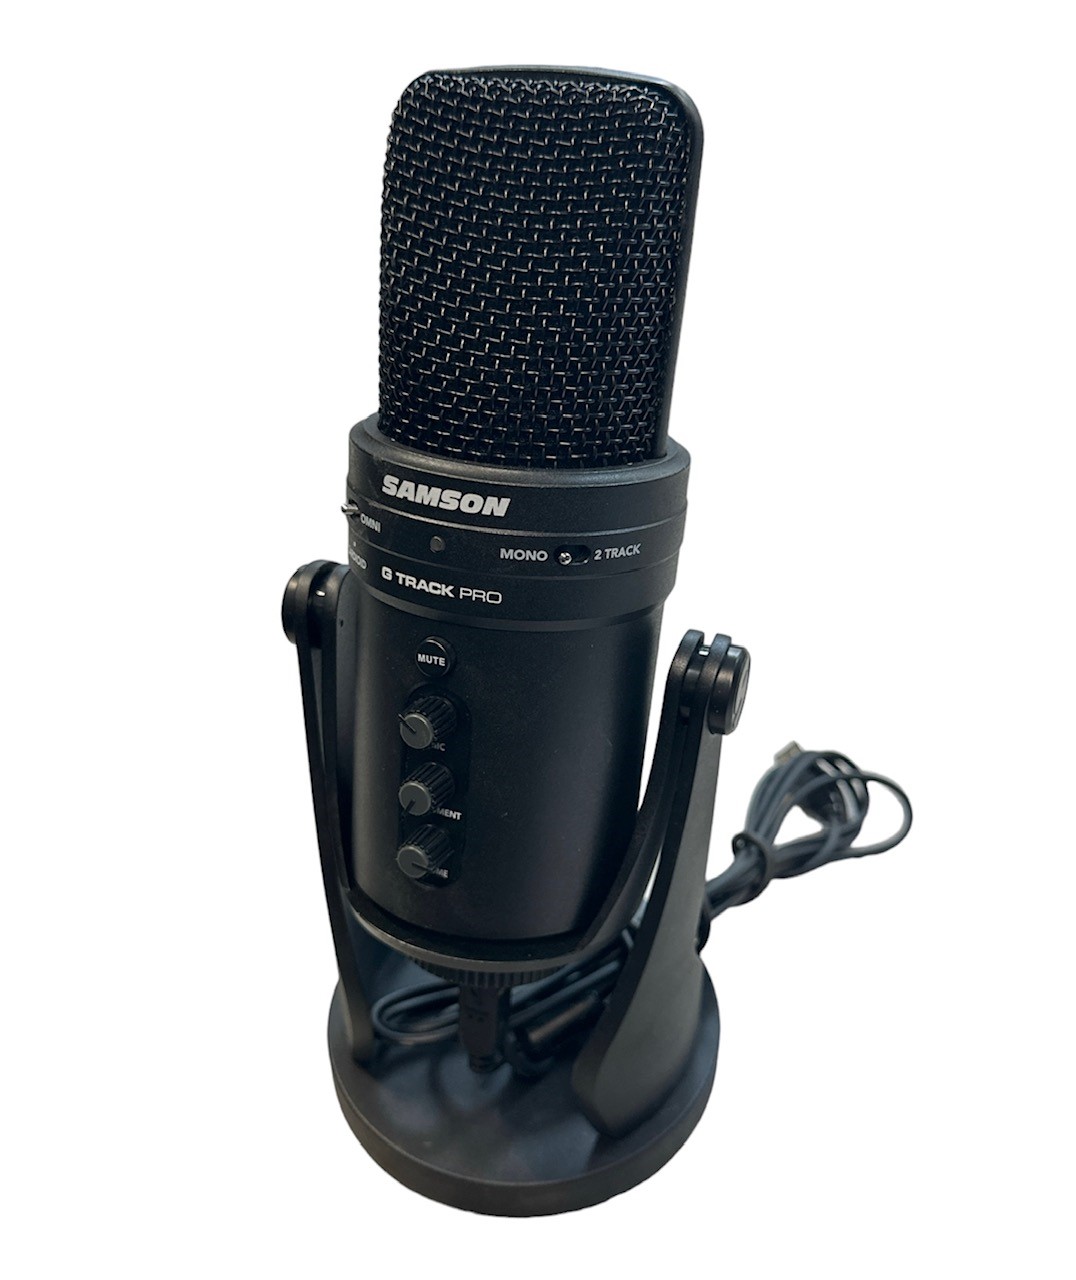 Samson G-Track Pro - Professional USB Microphone with Audio Interface - Black - Unboxed